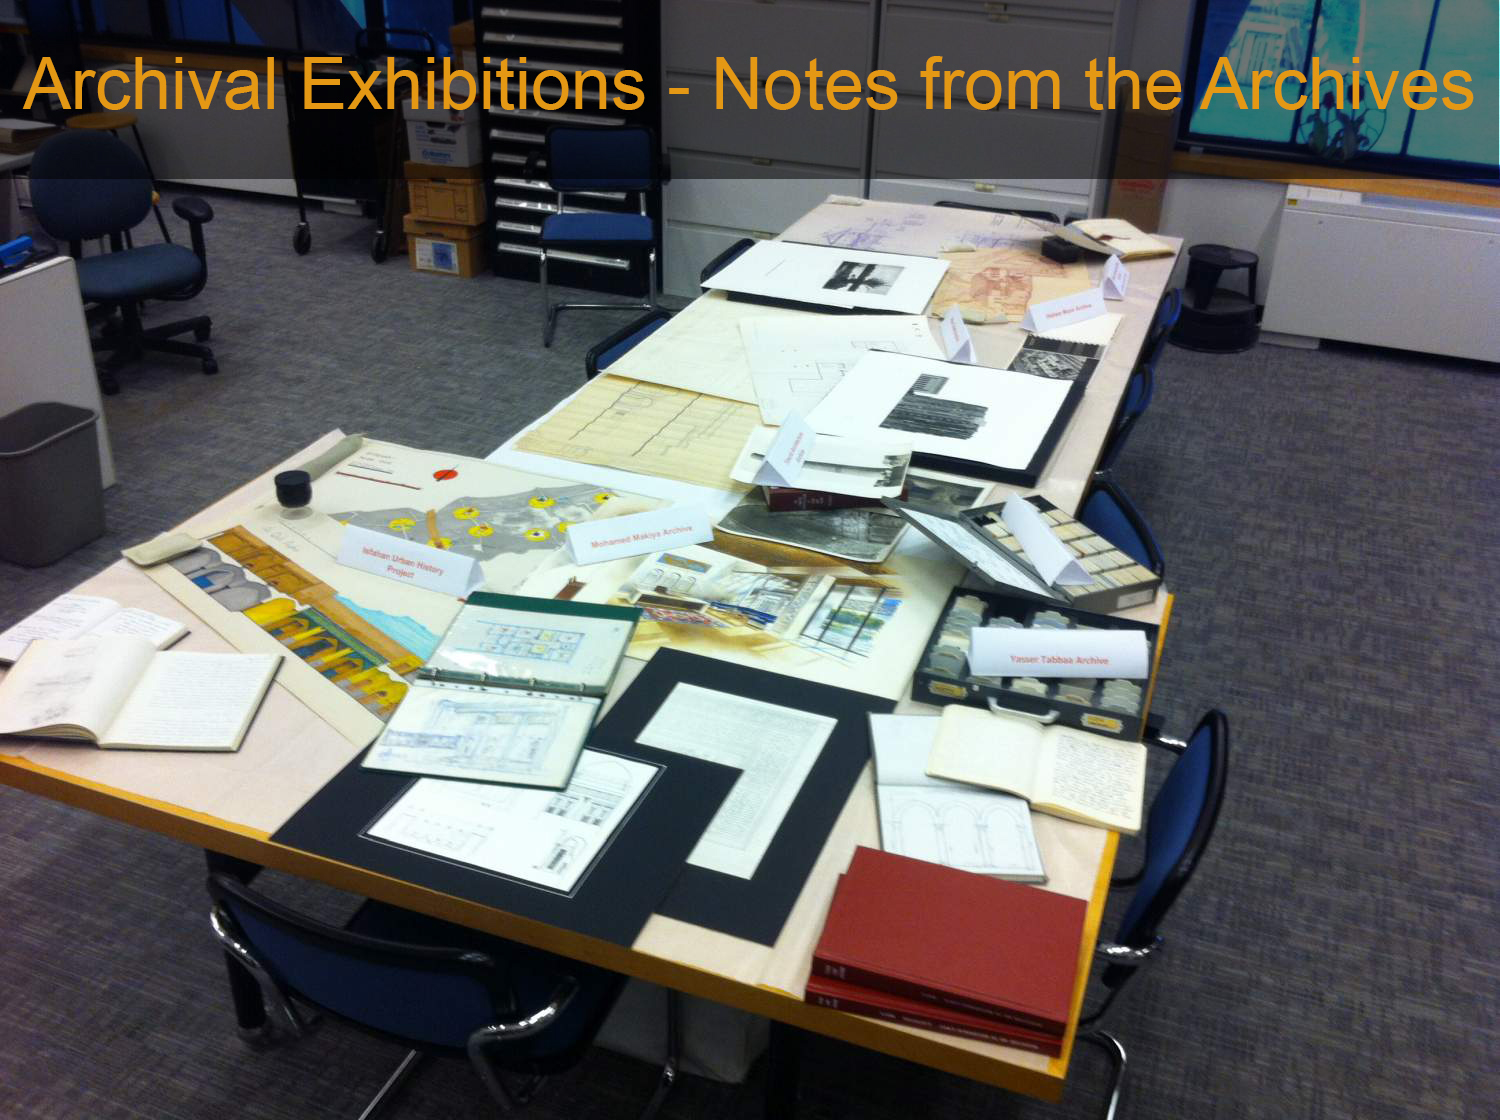 Archival Exhibitions - Notes from the Archives